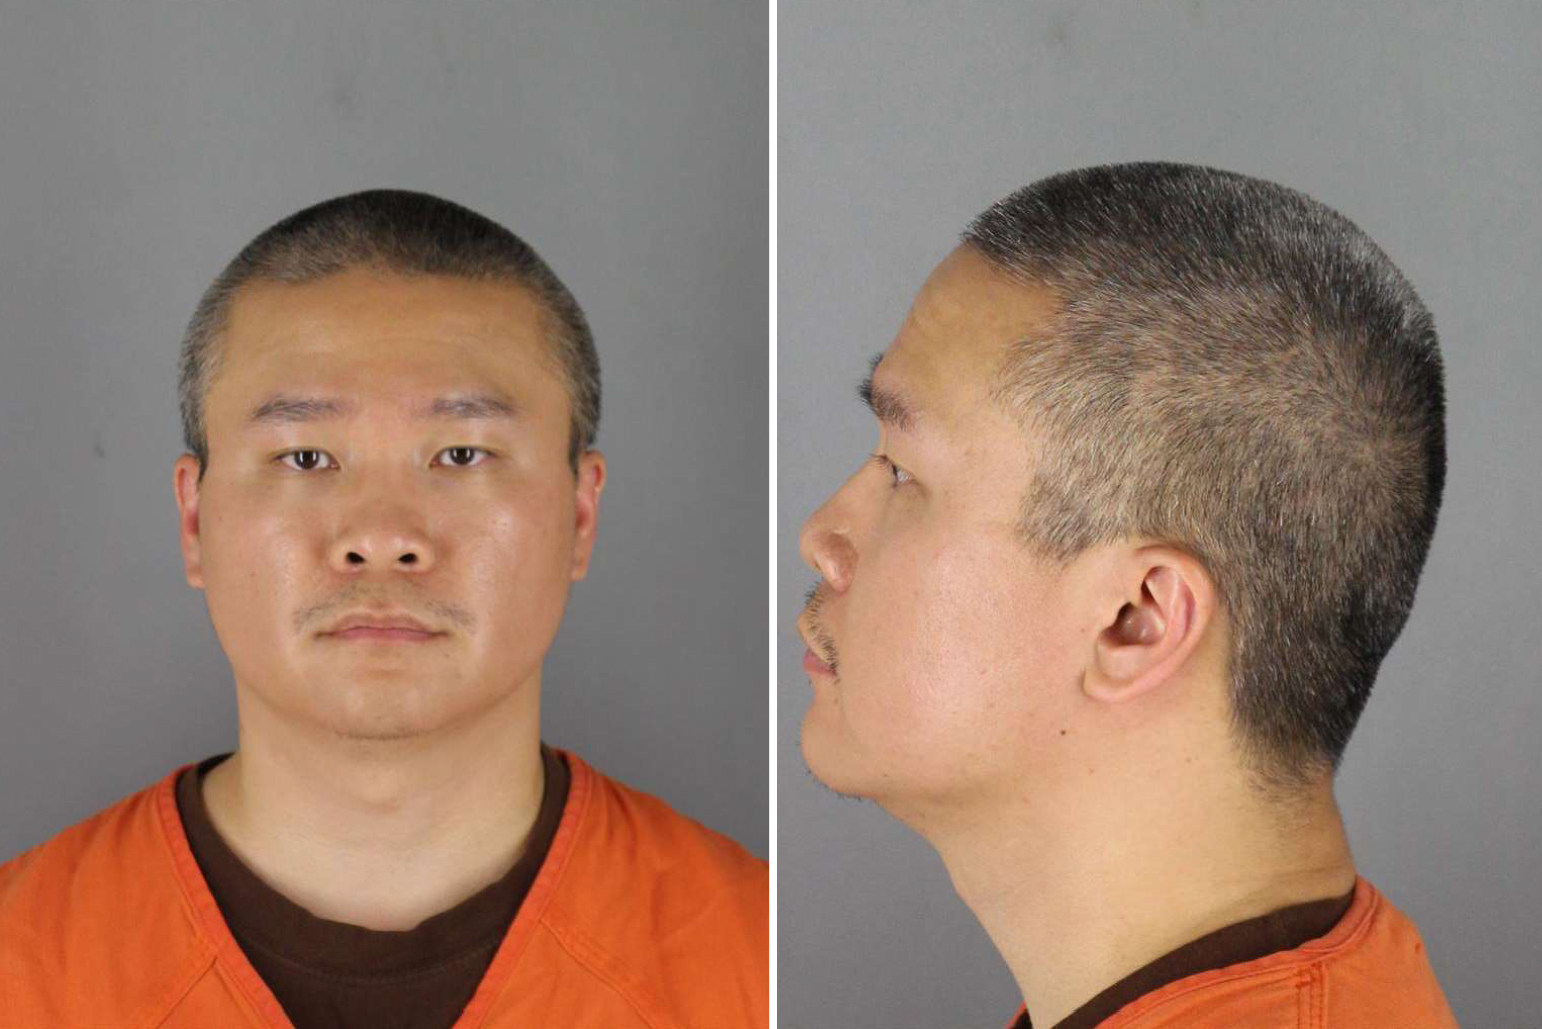 Former Minneapolis police officer Tou Thao was found guilty of aiding and abetting in the 2020 killing of George Floyd, a black man who died after his neck was pinned to the ground by another officer’s knee during a botched arrest. Photo: Handout/Hennepin County Jail/AFP